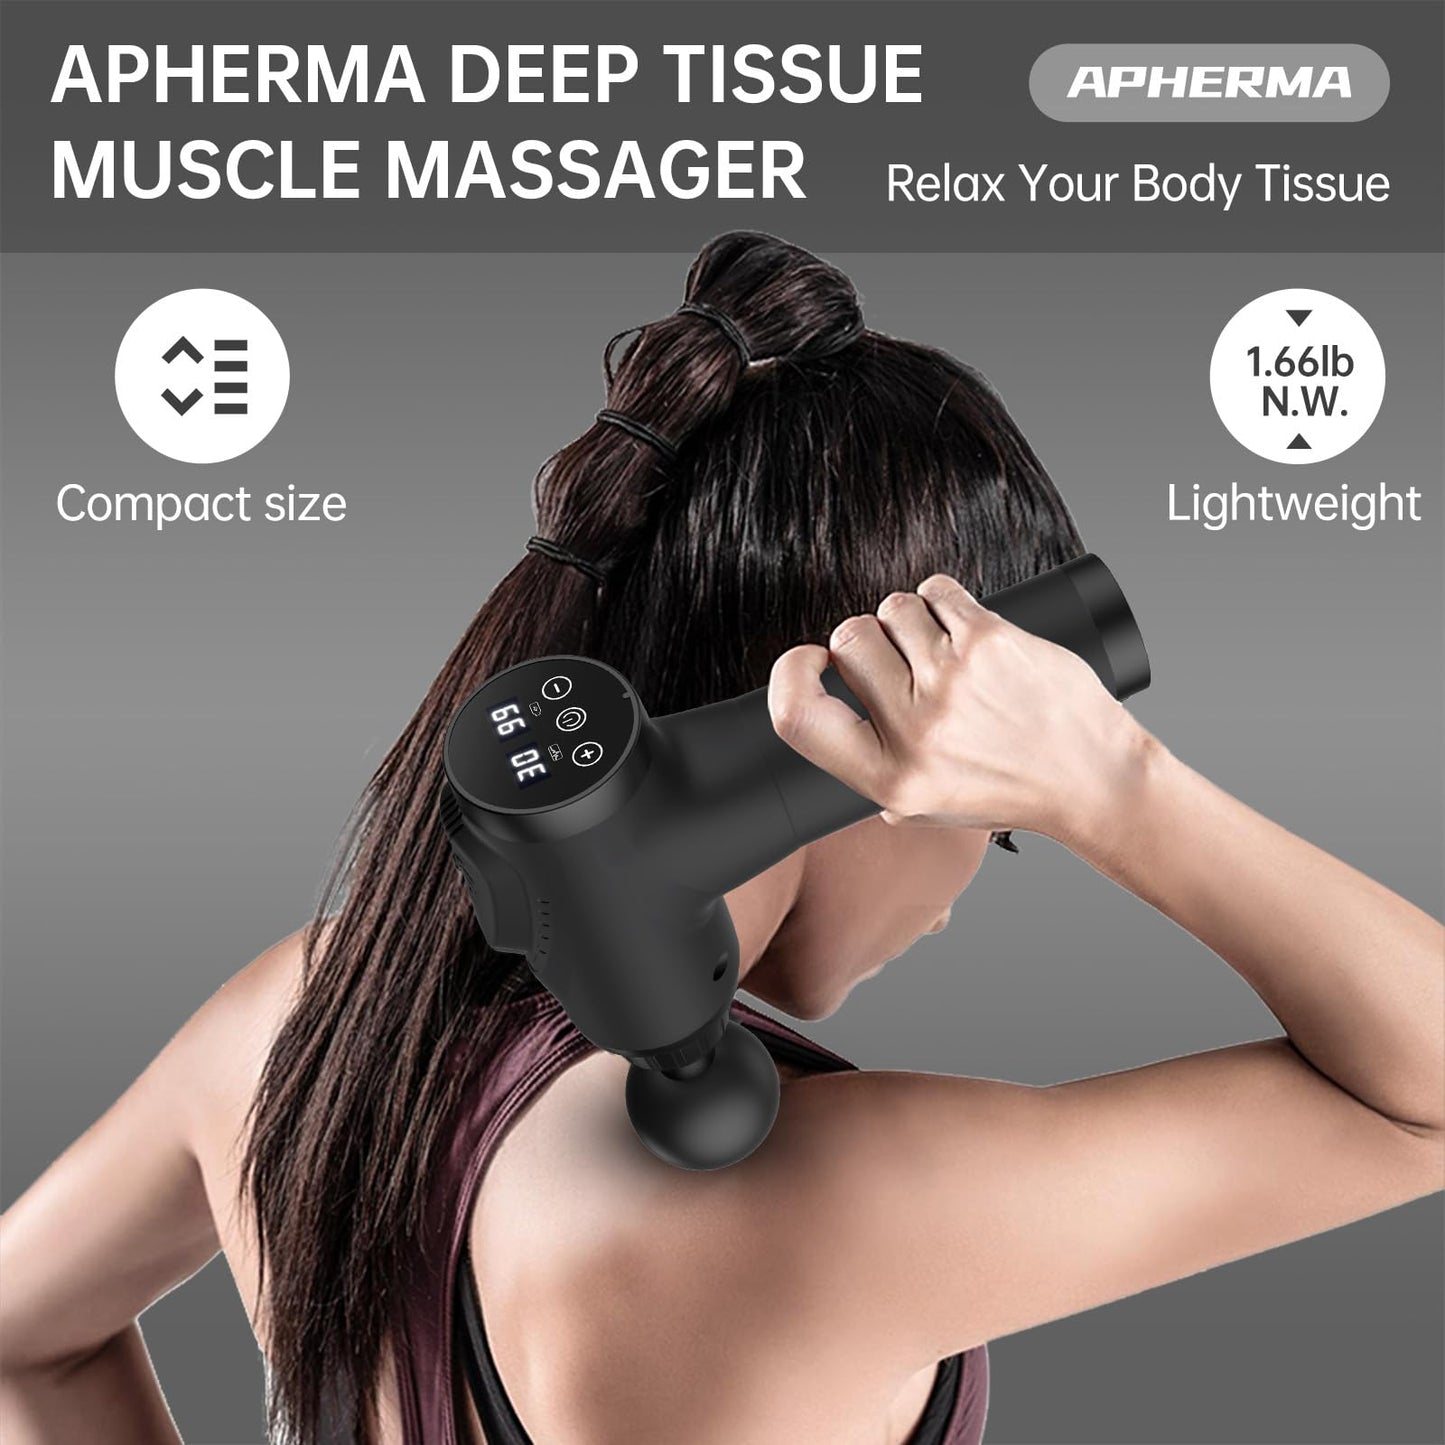 APHERMA Massage Gun, Muscle Massage Gun for Athletes Handheld Electric Deep Tissue Back Massager, Percussion Massage Device for Pain Relief with 30 Speed Levels 9 Heads back massageAPHERMA Massage Machine, Muscle Massage Machine for Athletes Handheld Electric Deep Tissue Back Massager, Percussion Massage Device for Pain Relief with 30 Speed Levels 9 Heads back massage